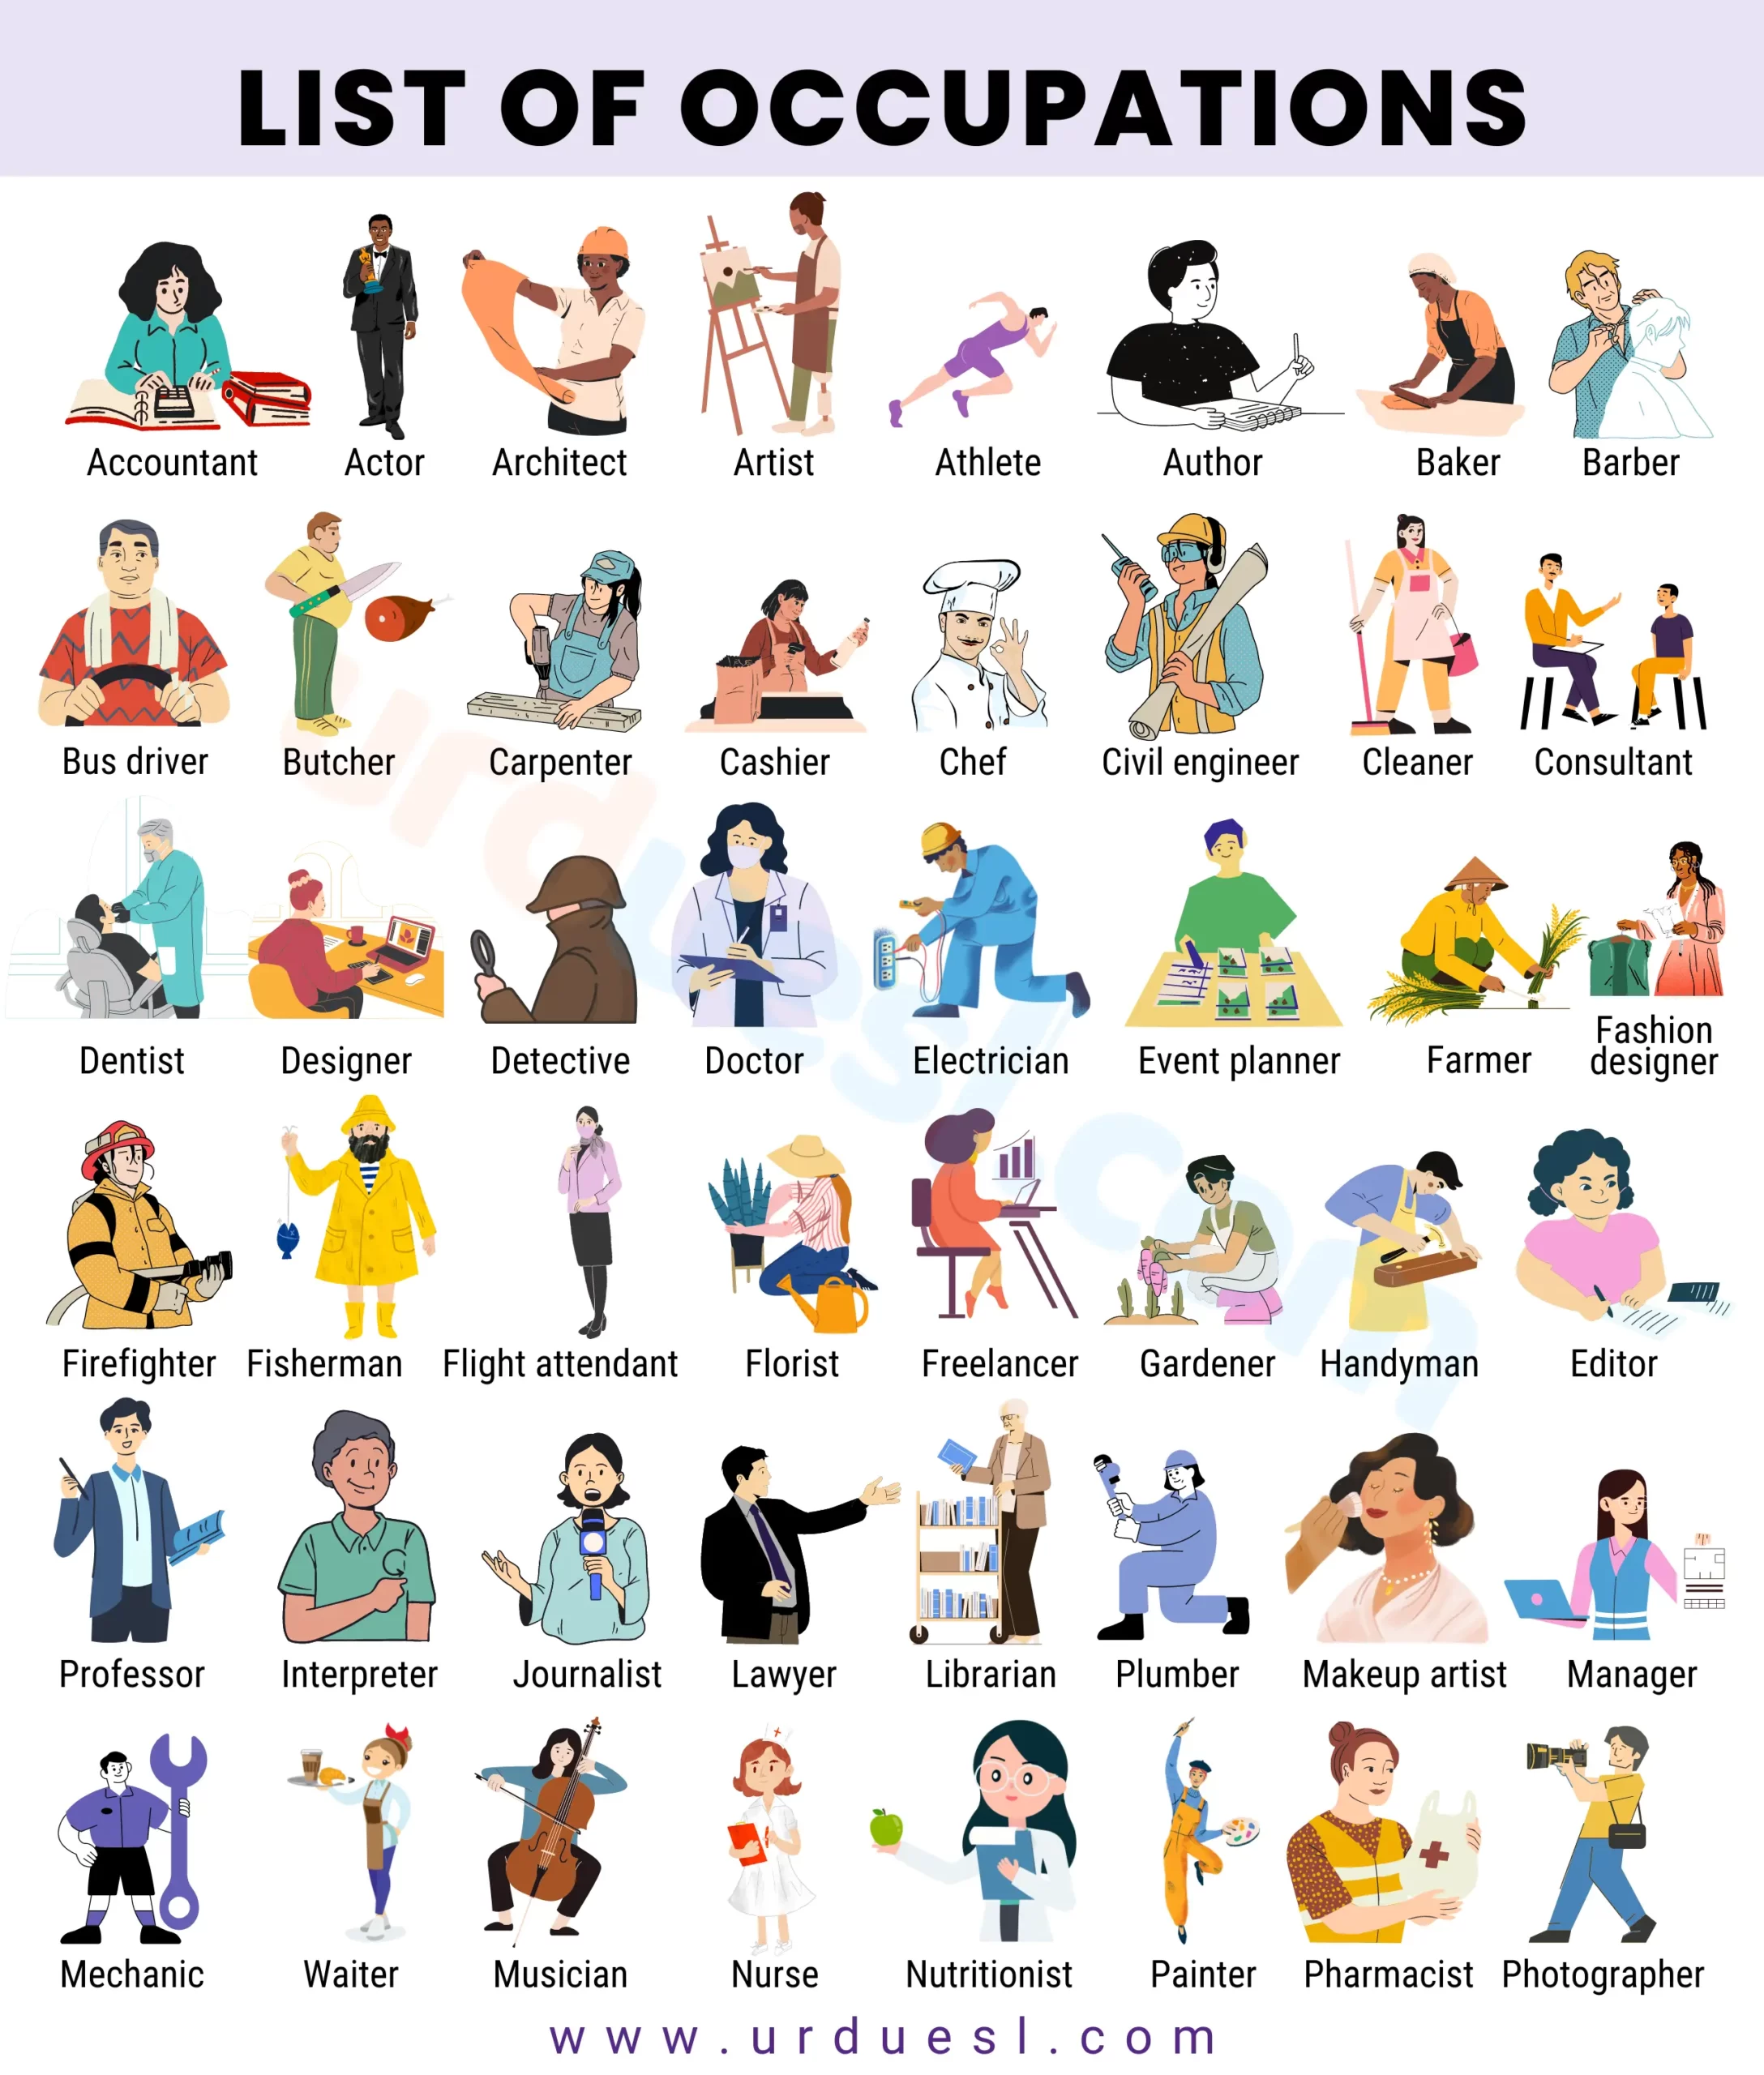 an image showing various occupations and jobs a person does in the world with pictures.